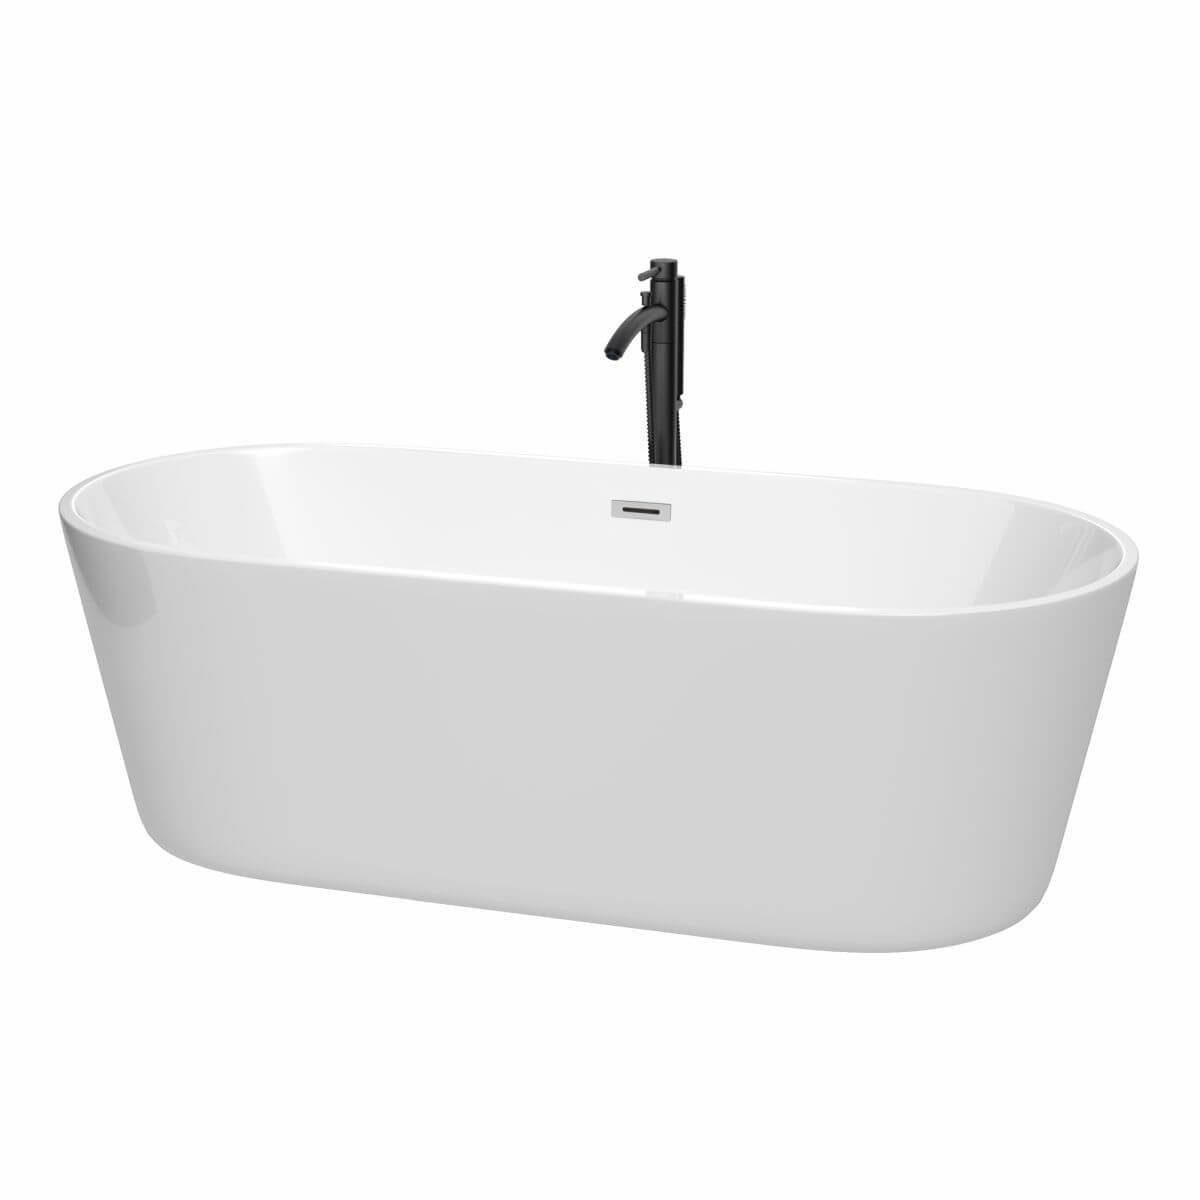 Wyndham Collection Carissa 71 inch Freestanding Bathtub in White with Polished Chrome Trim and Floor Mounted Faucet in Matte Black - WCOBT101271PCATPBK